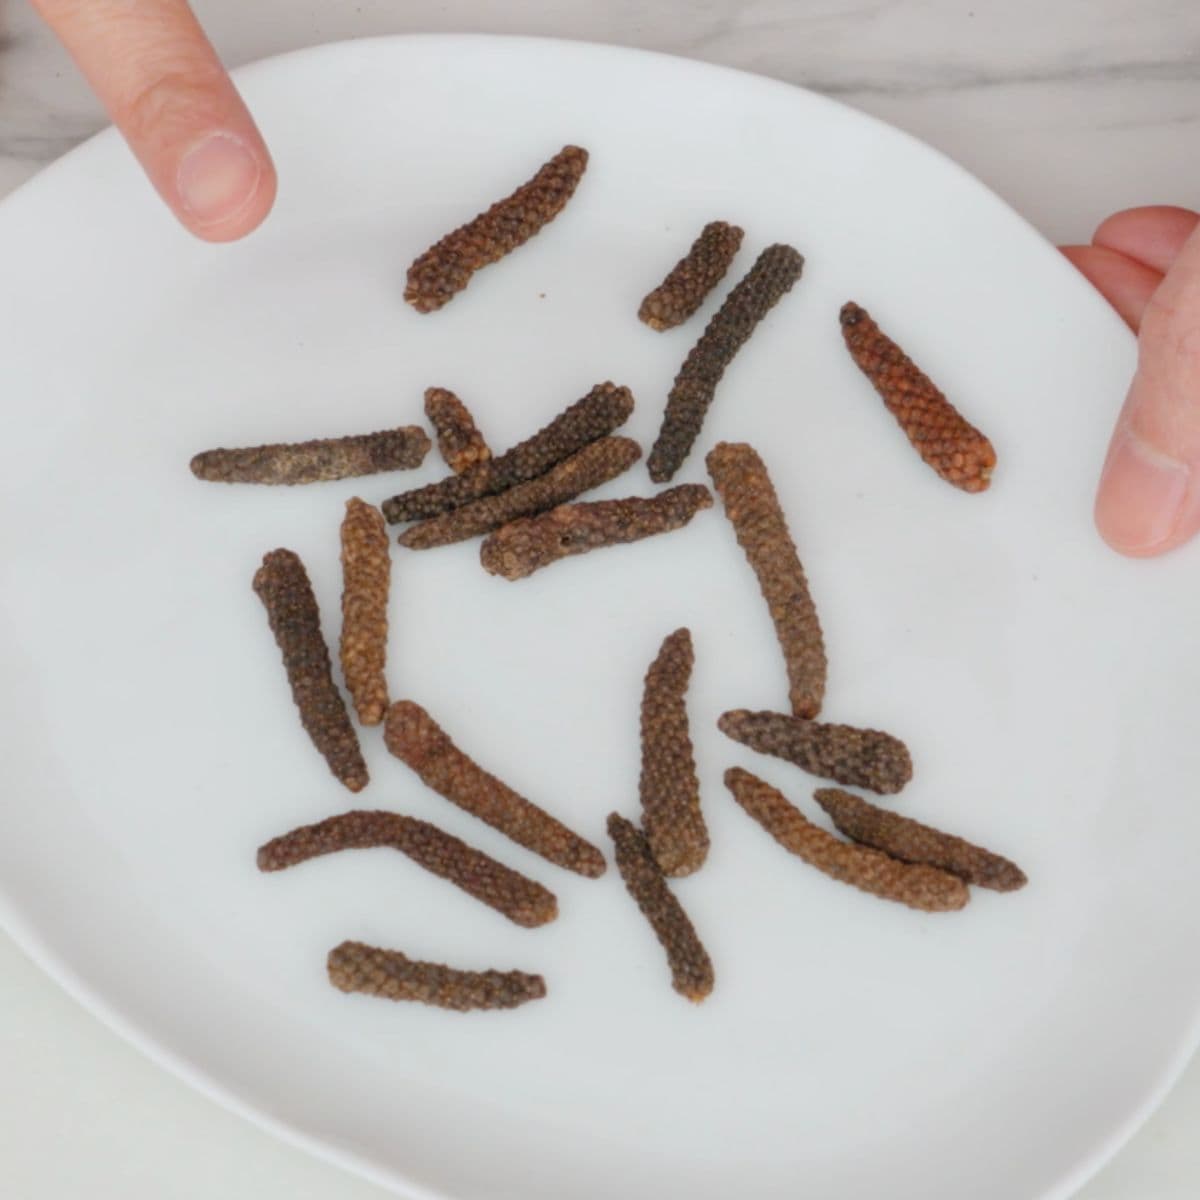 Indian long pepper on a plate